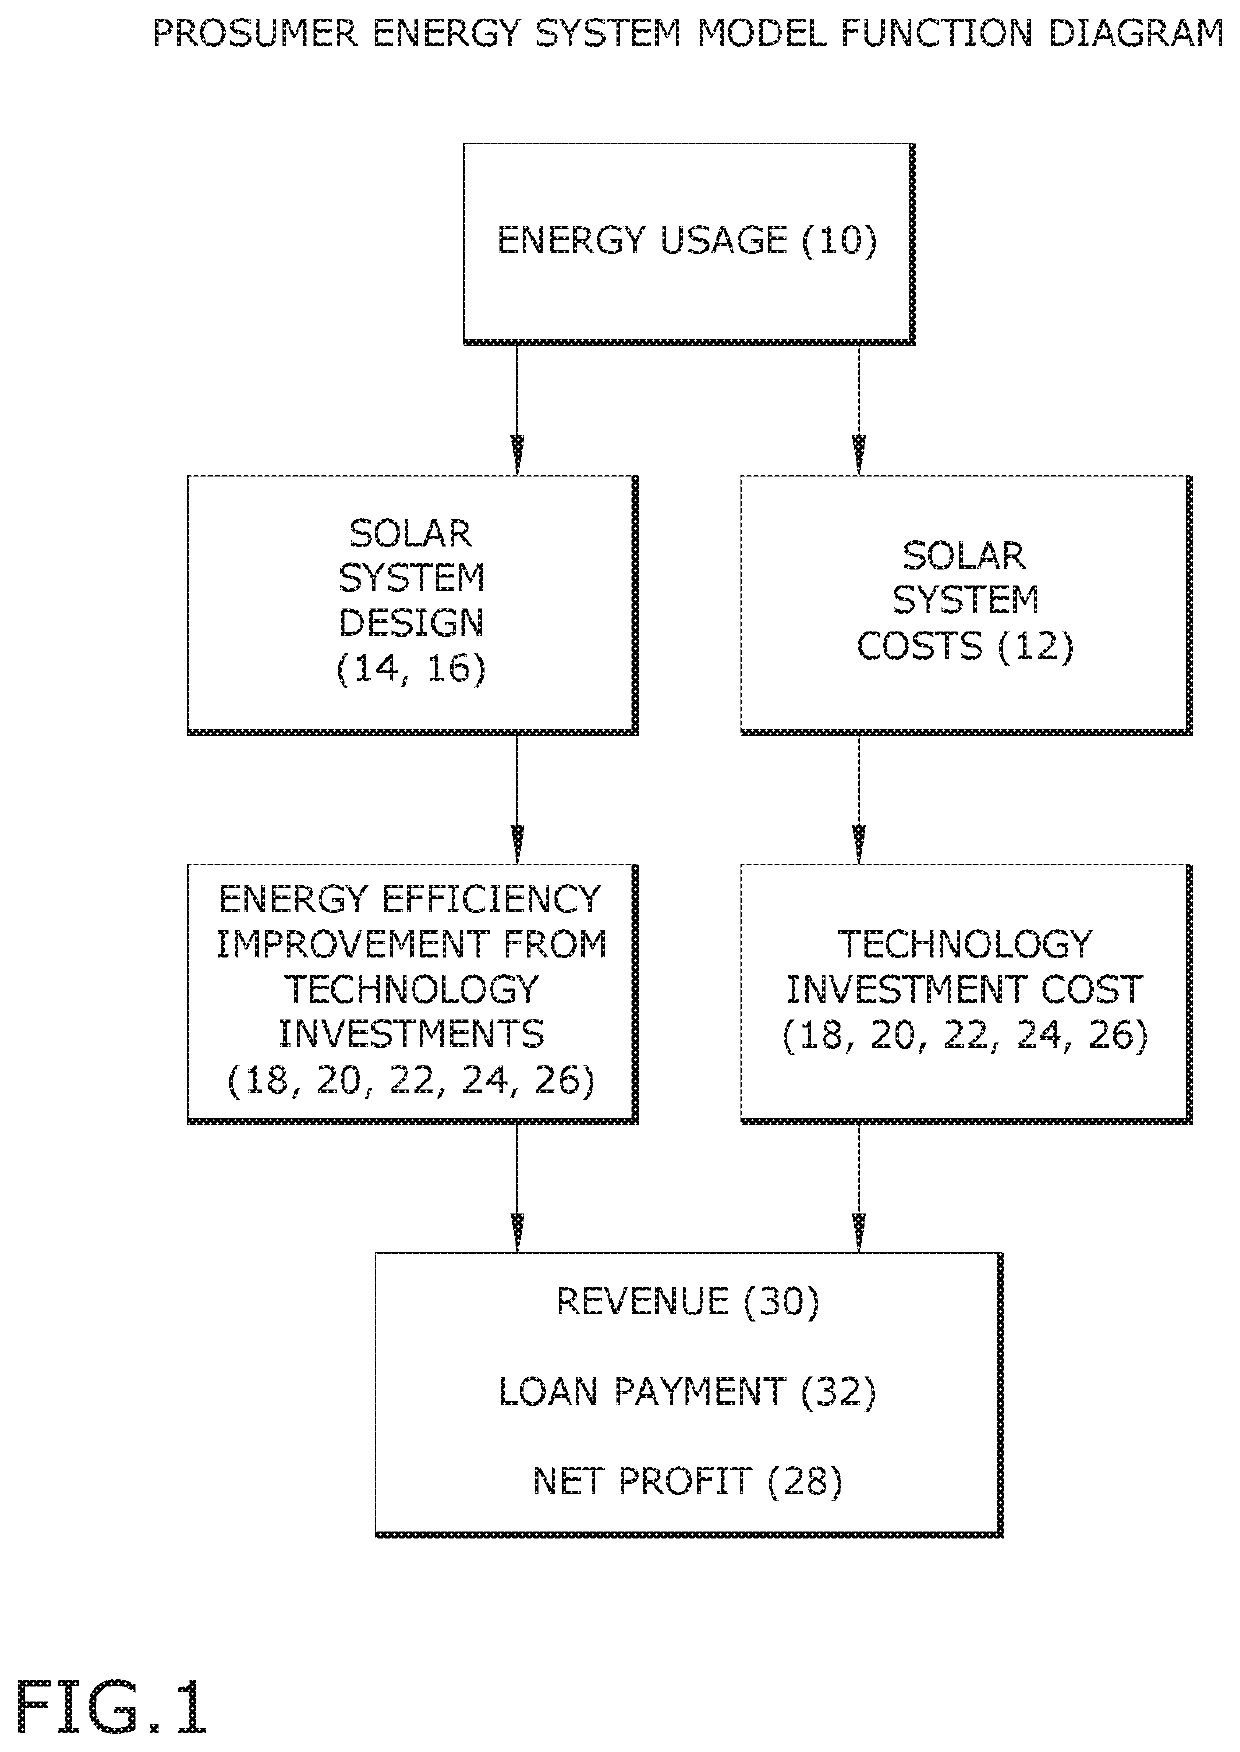 Model for balancing energy in a prosumer energy system